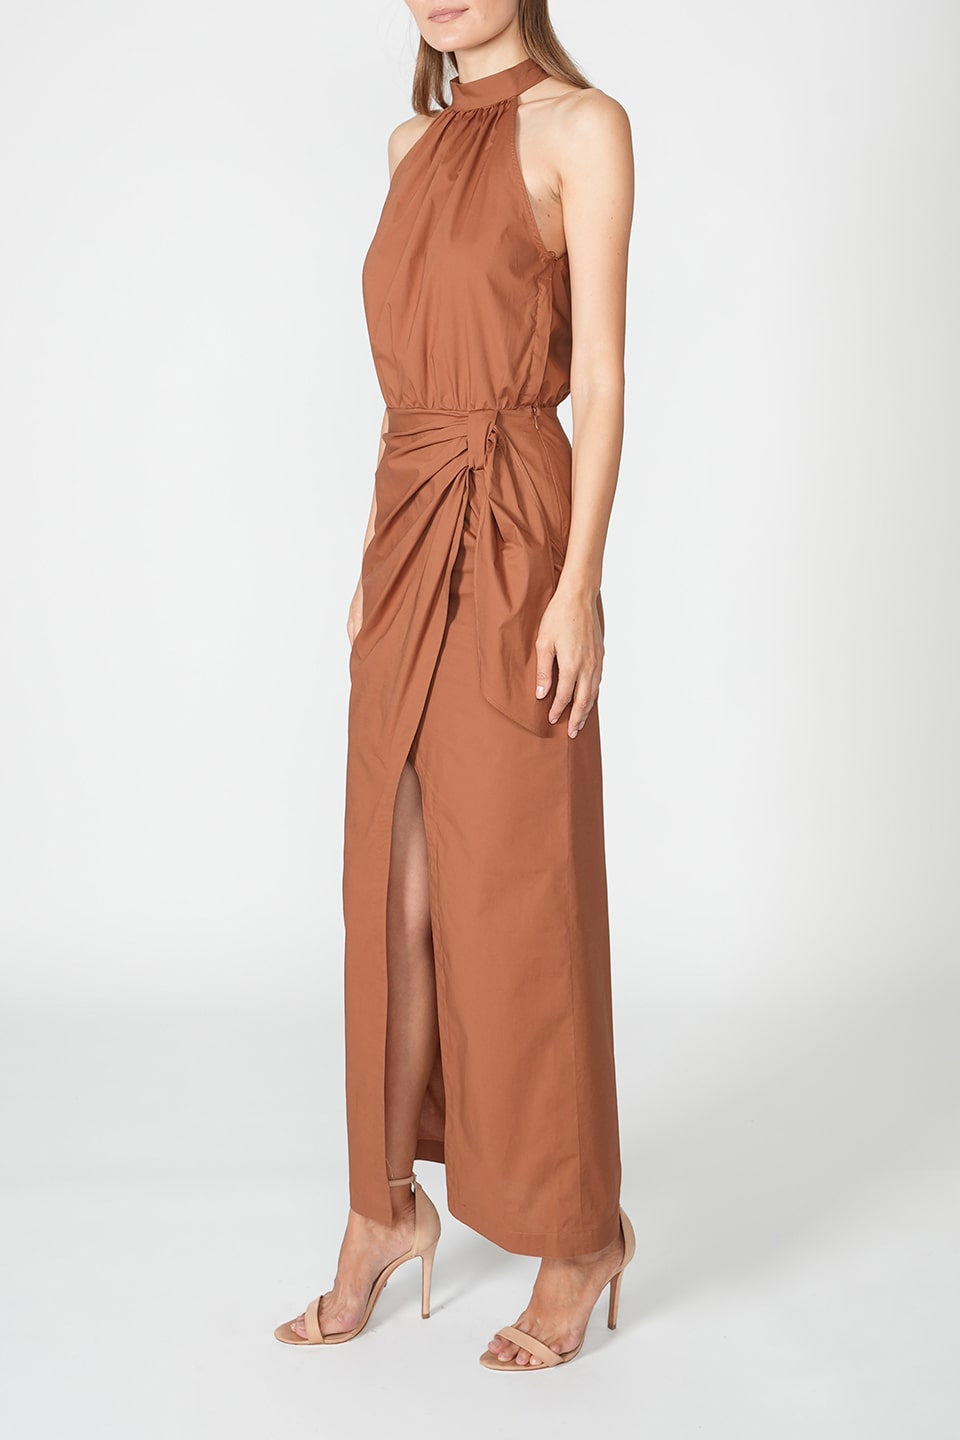 Designer Chocolate Midi dresses, shop online with free delivery in UAE. Product gallery 2